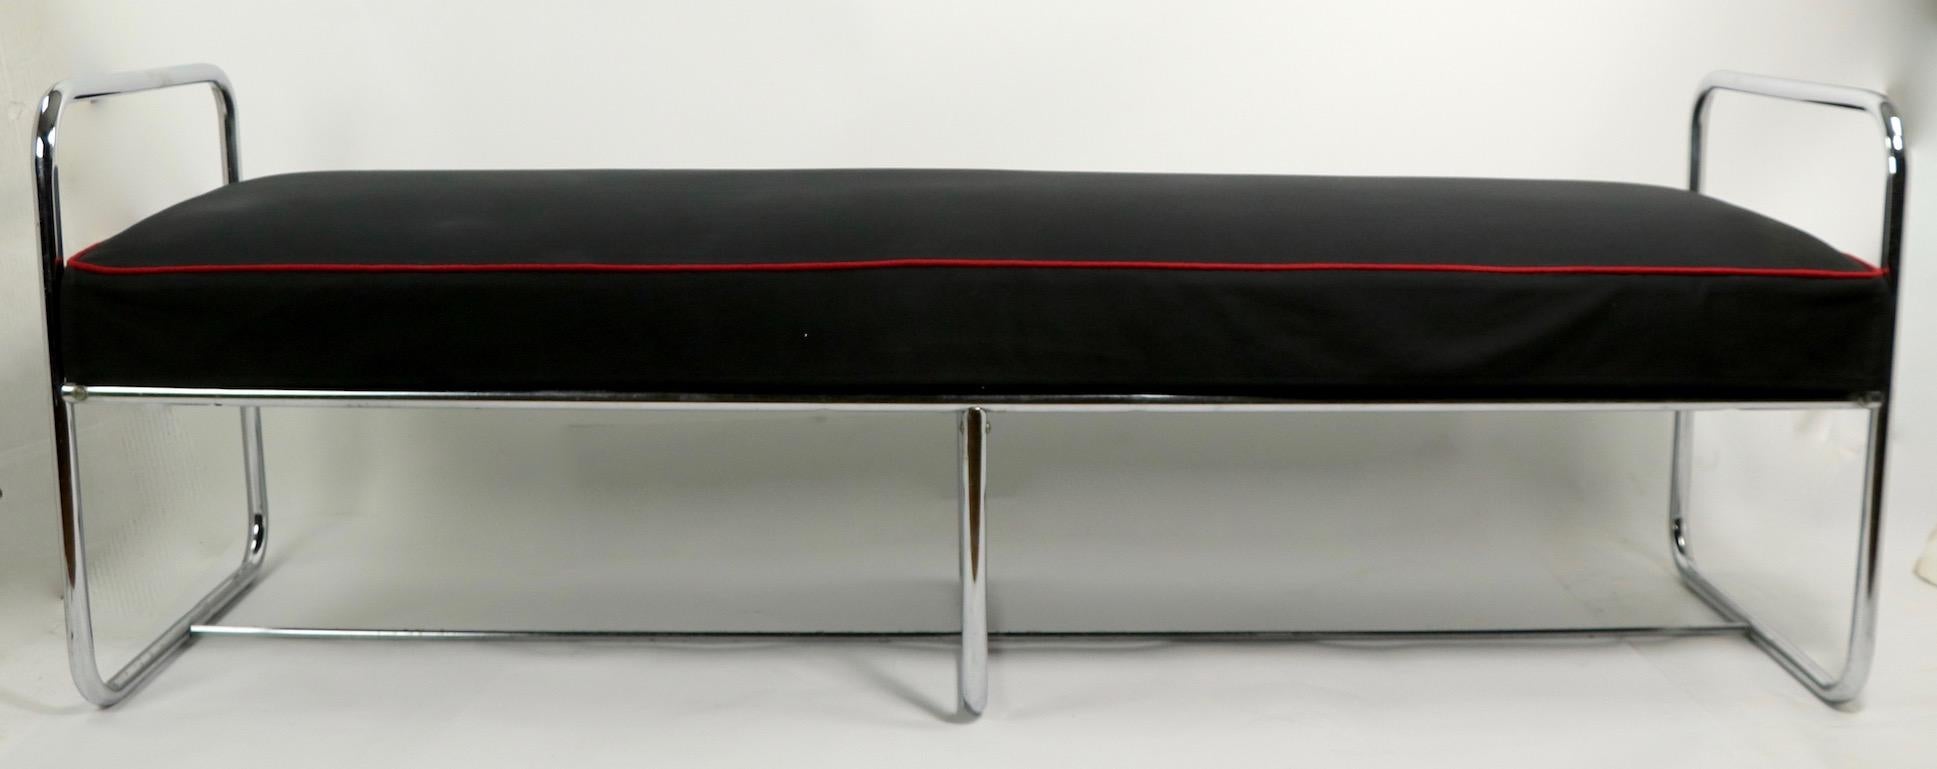 Rare Machine Age bench designed by Wolfgang Hoffman, having a tubular chrome base and upholstered pad seat. This example is in very good condition, clean and ready to use. The seat has probably been reupholstered, currently in skirted black fabric